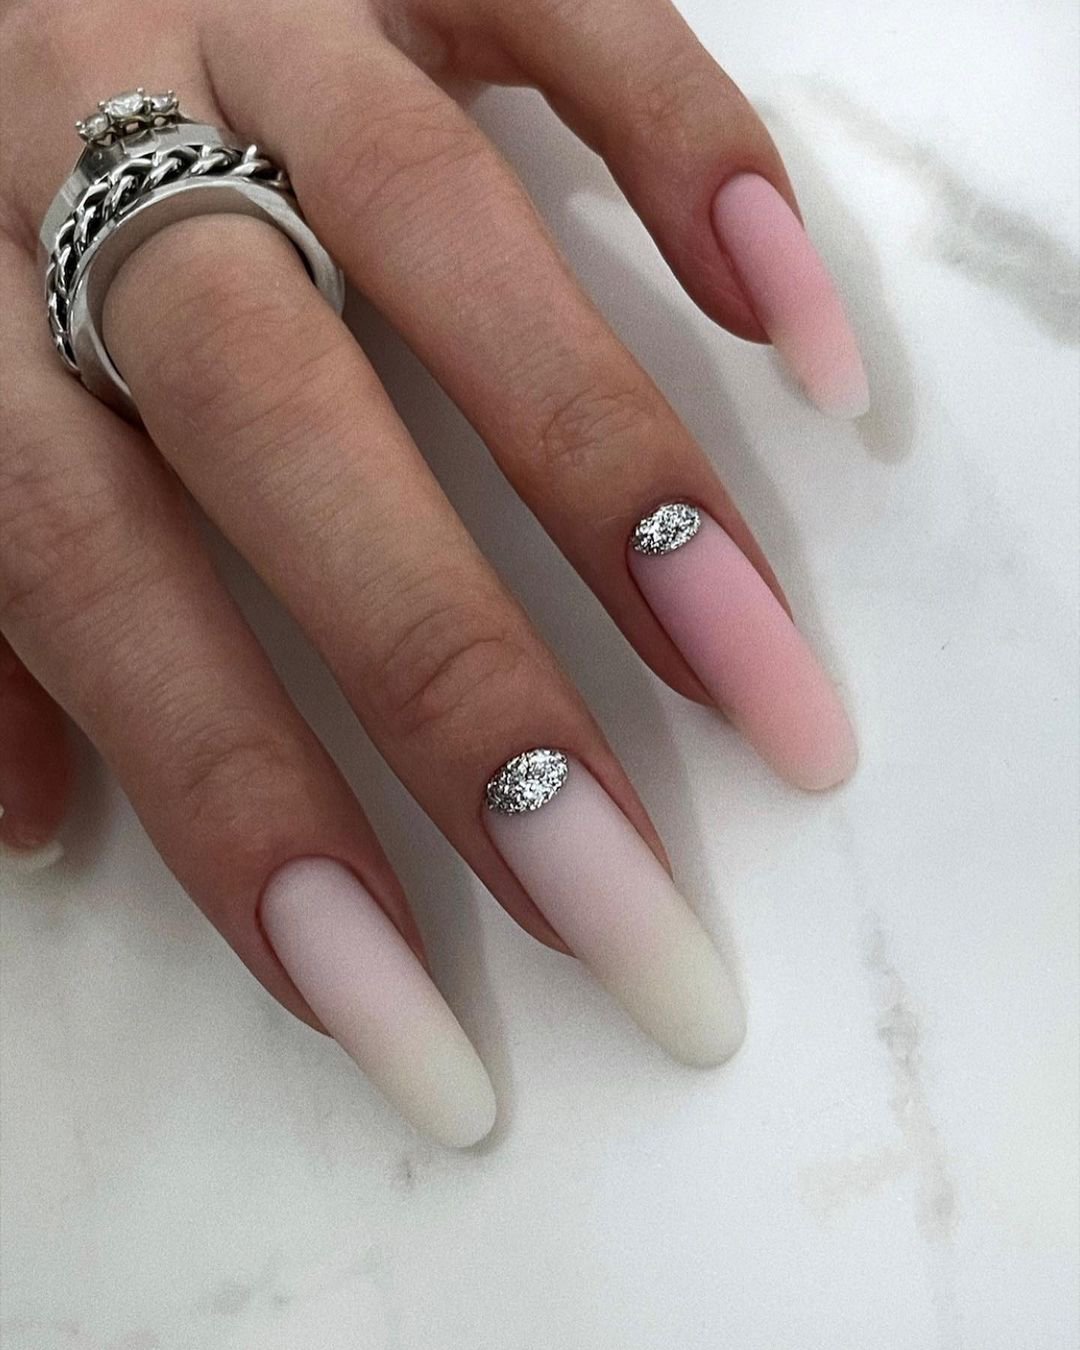 pink and white nails wedding acrylics ombre with silver glitter tatyana_kor